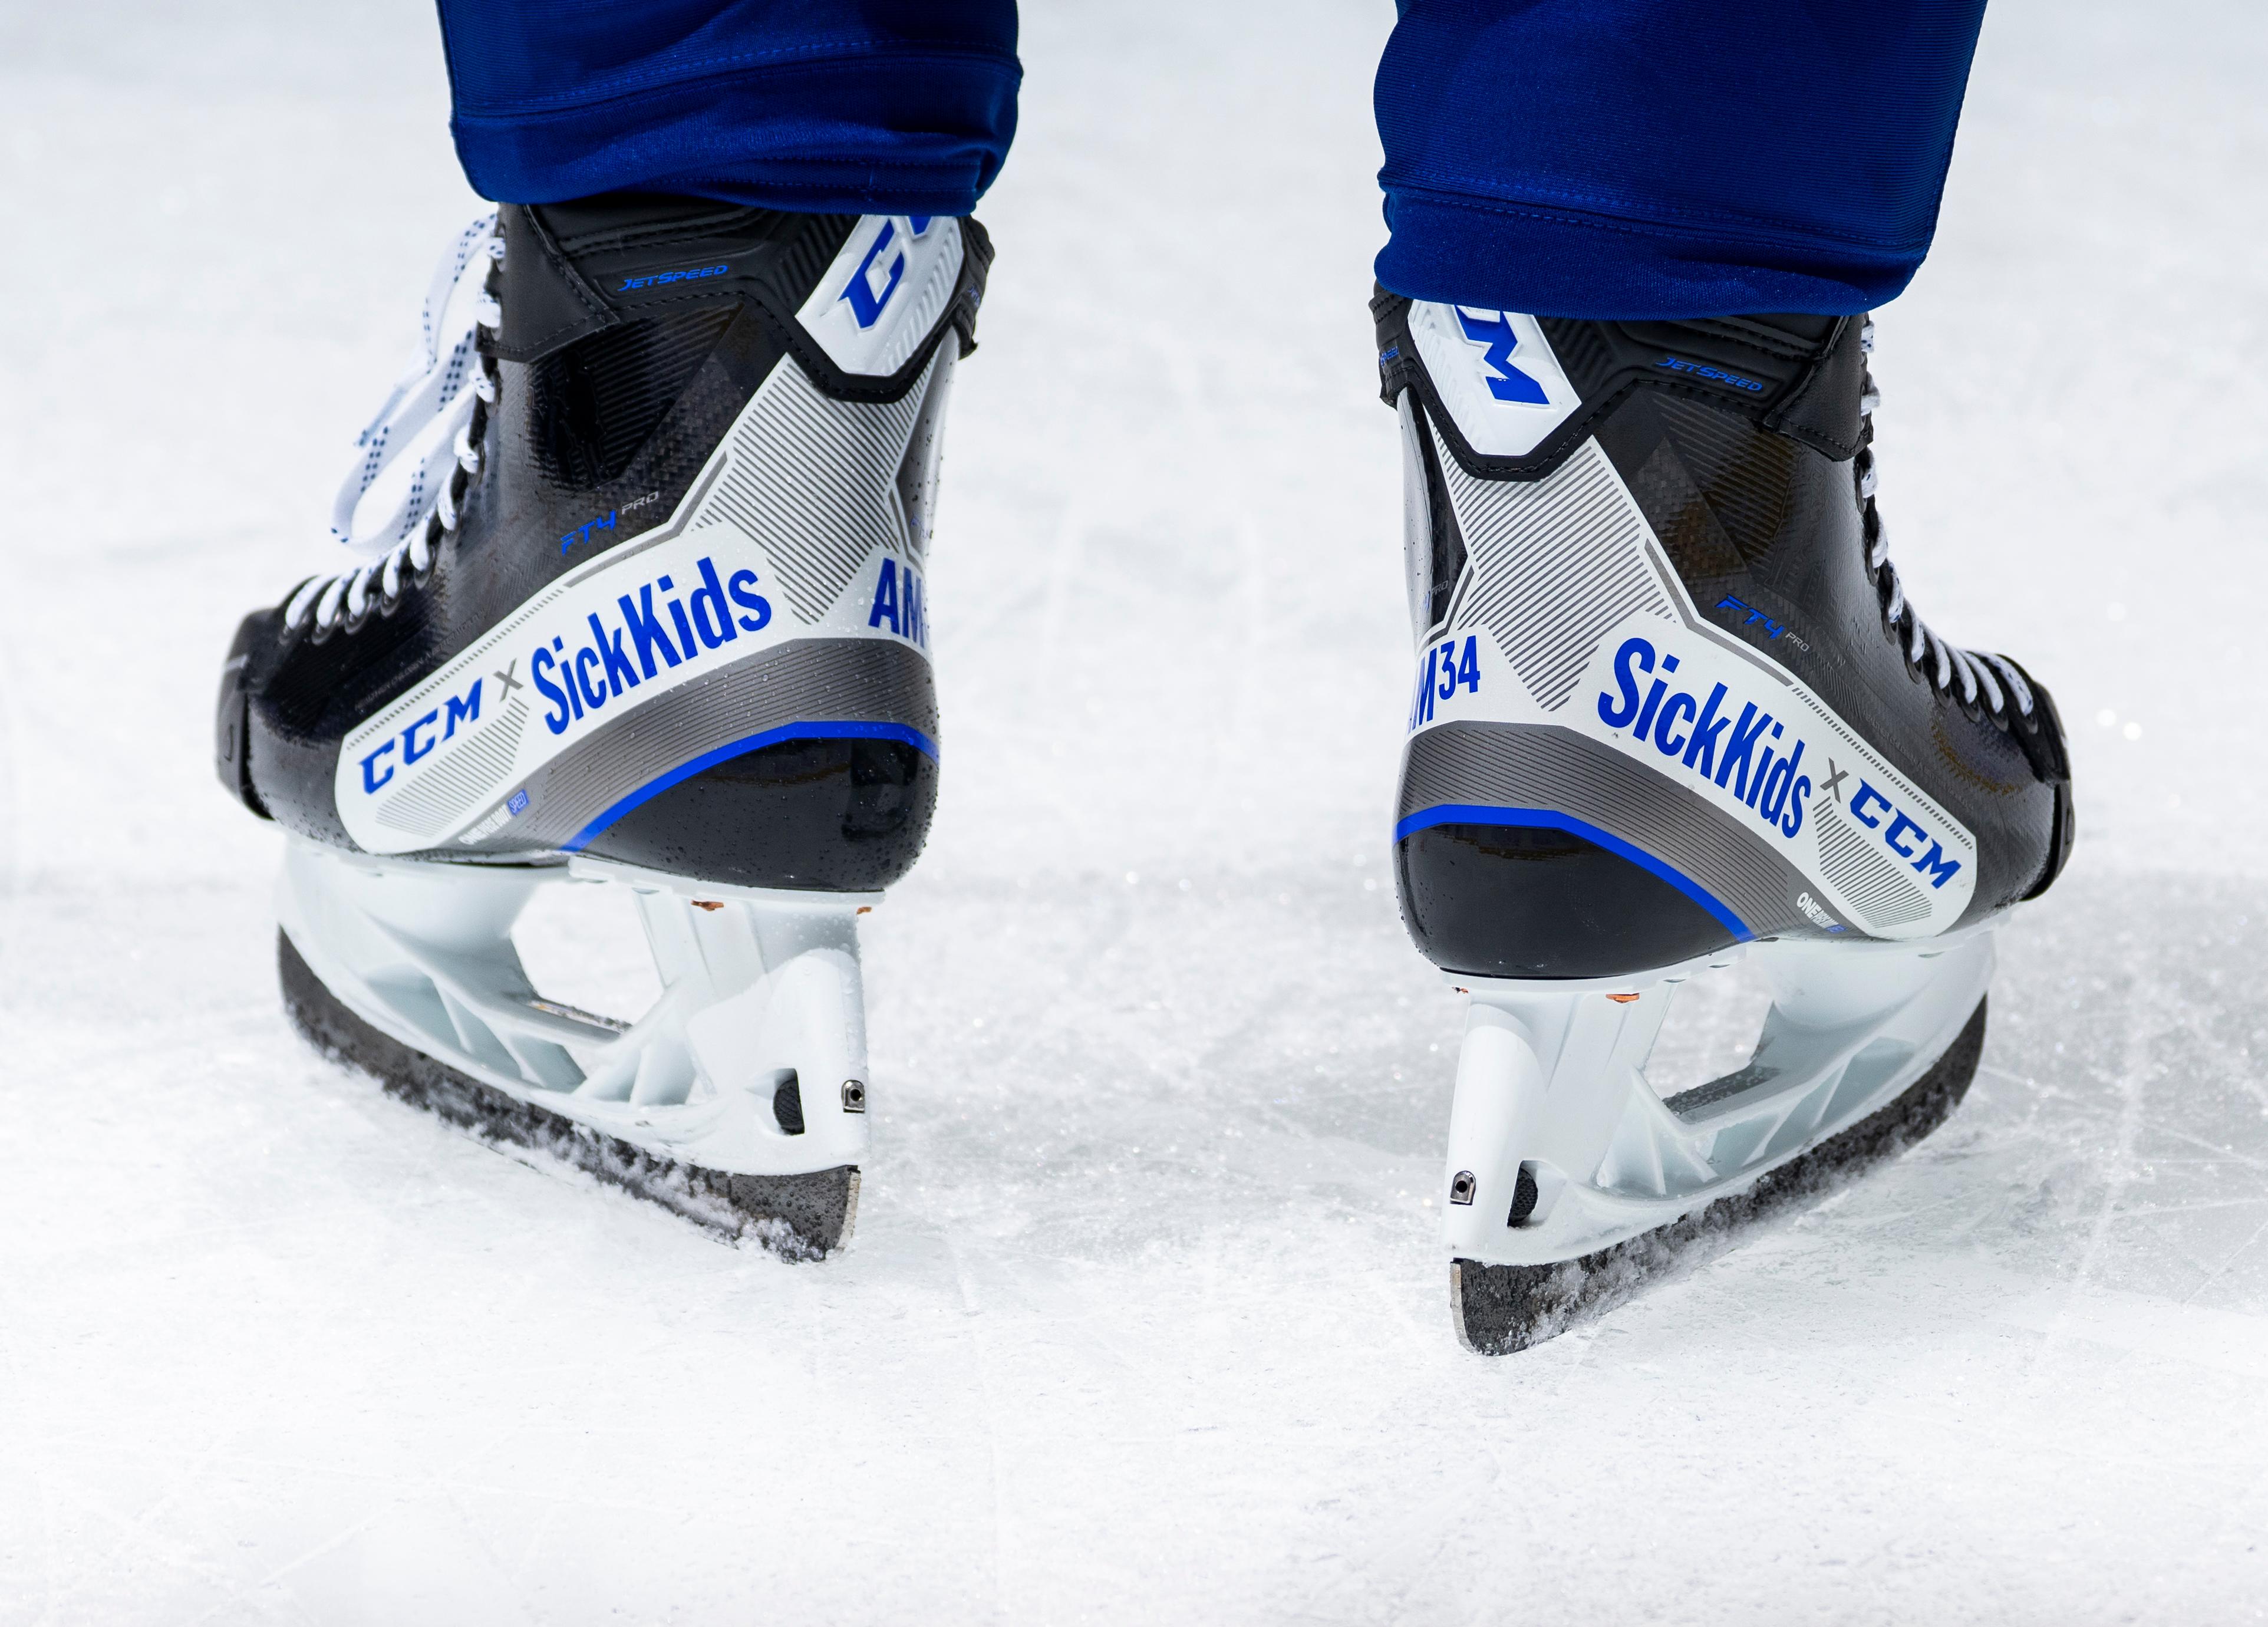 TheLeafsNation on X: Here's a look at Auston Matthews' new skates